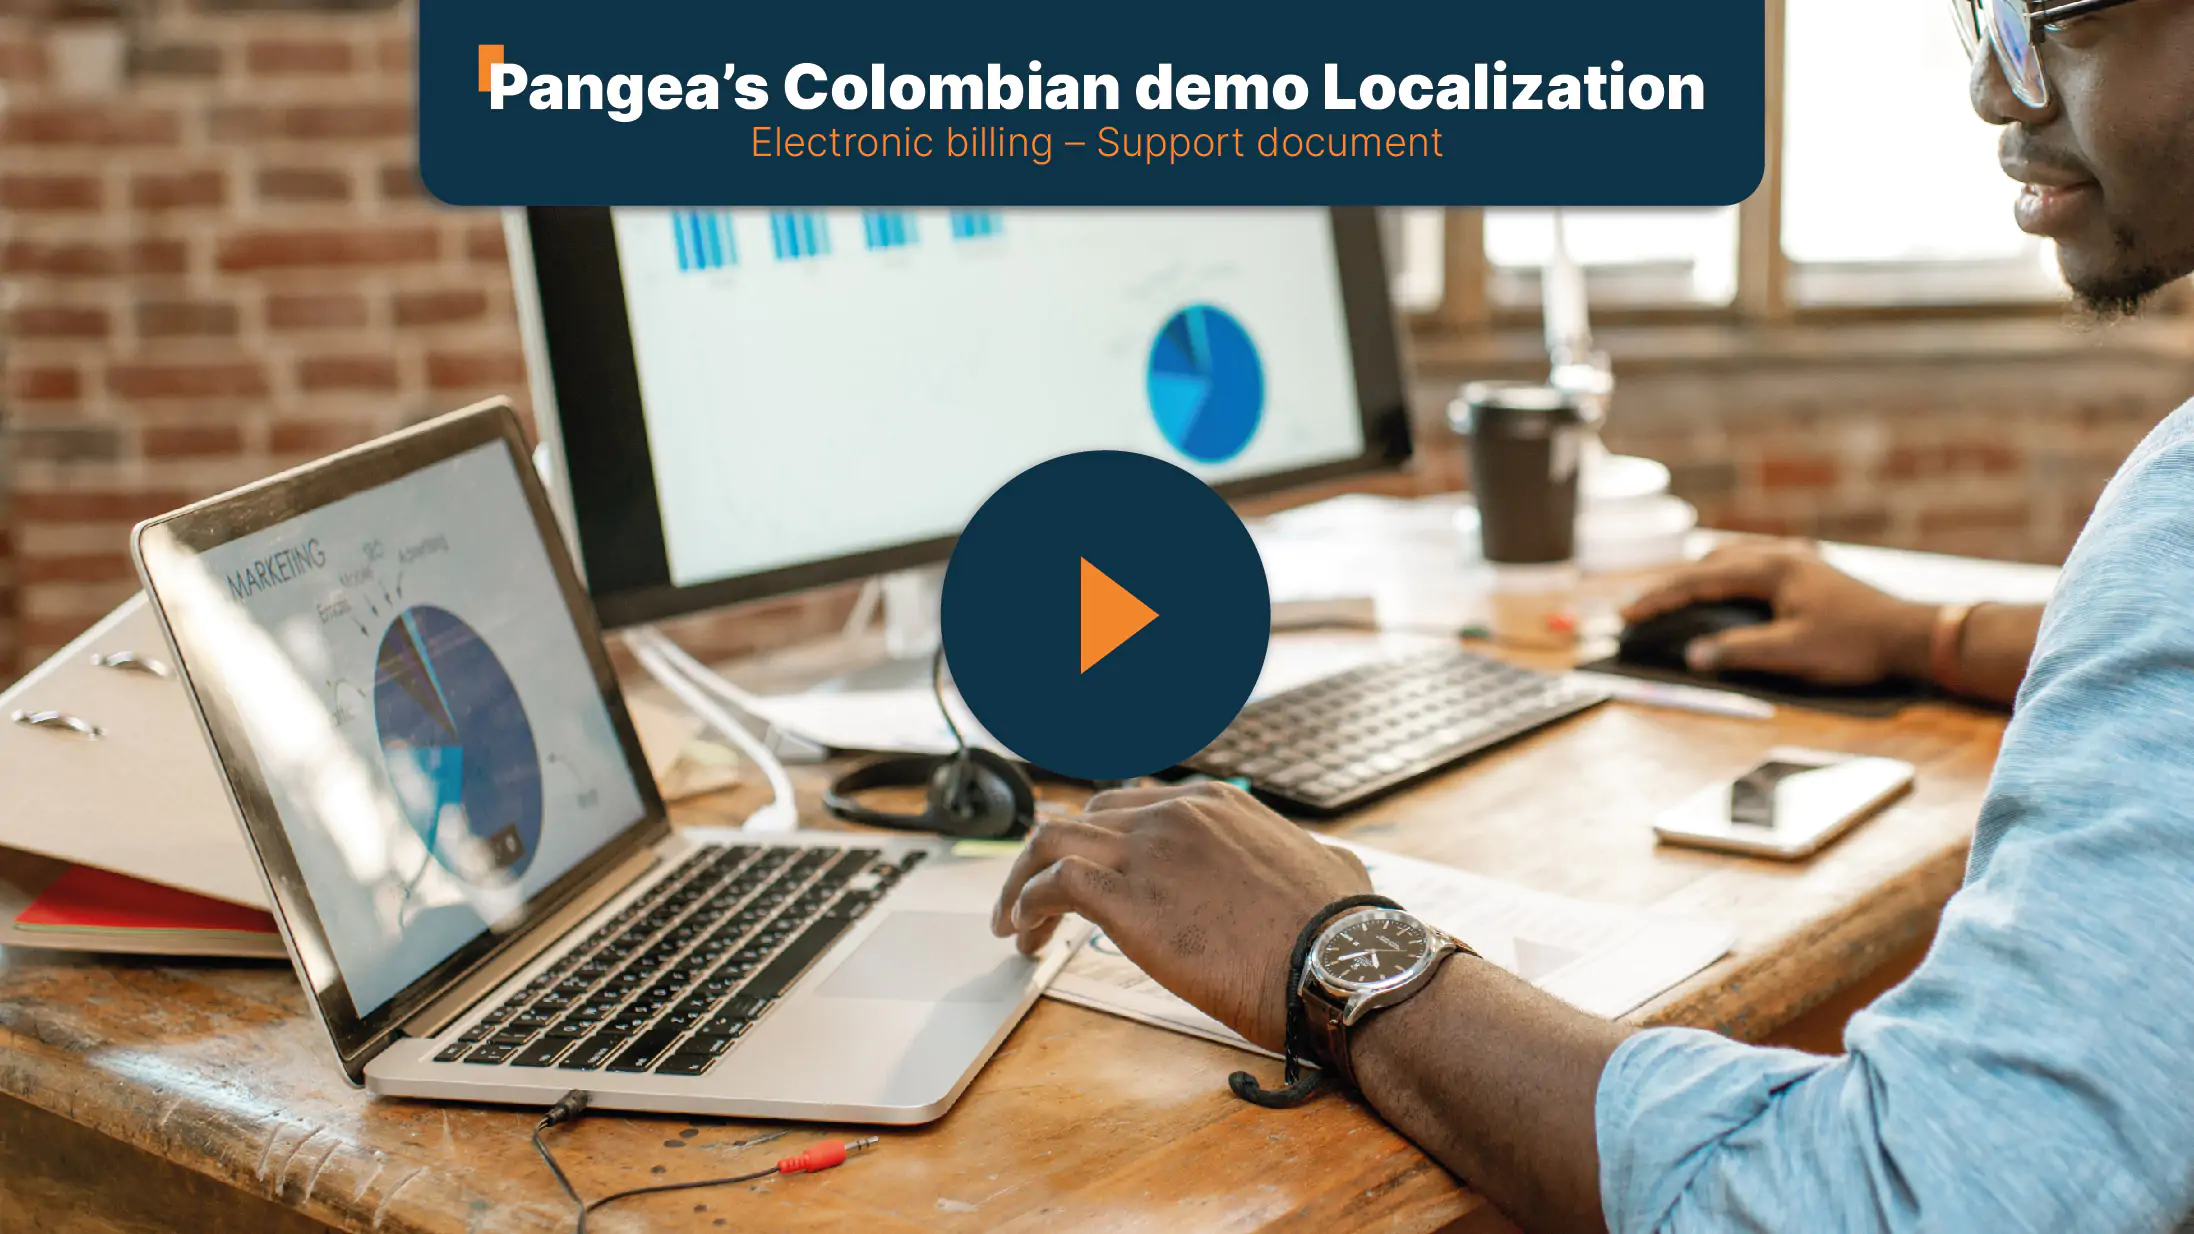 Session III: Pangea Consultants' Colombian Localization 2